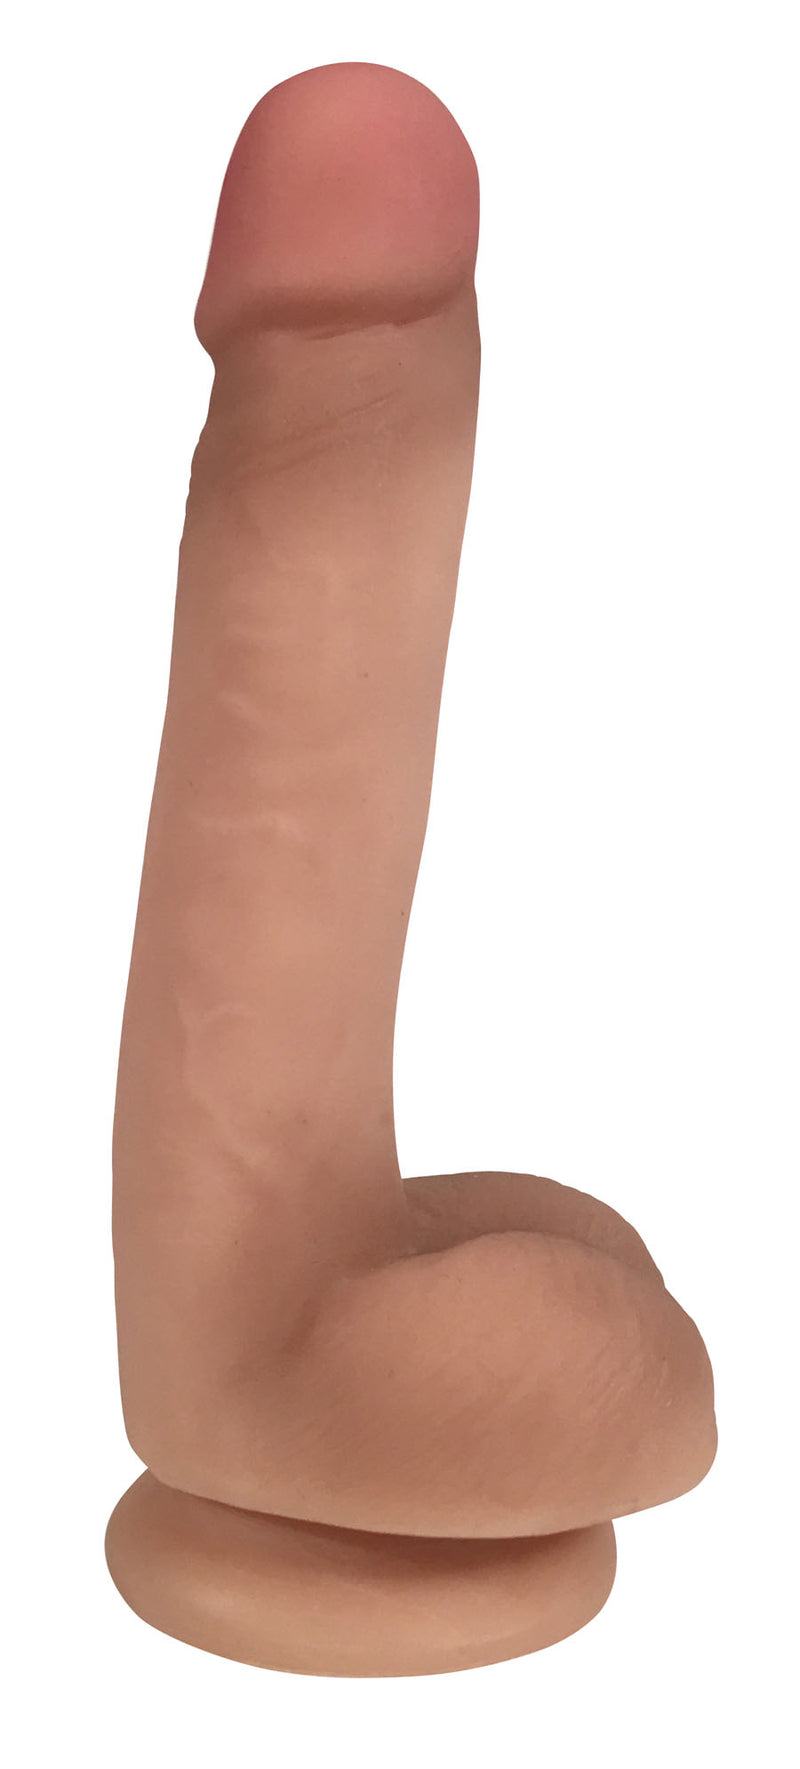 Realistic Dual-Density Dong with Suction Cup Base and Balls for Hands-Free Fun and Versatility - 7 Inches Long